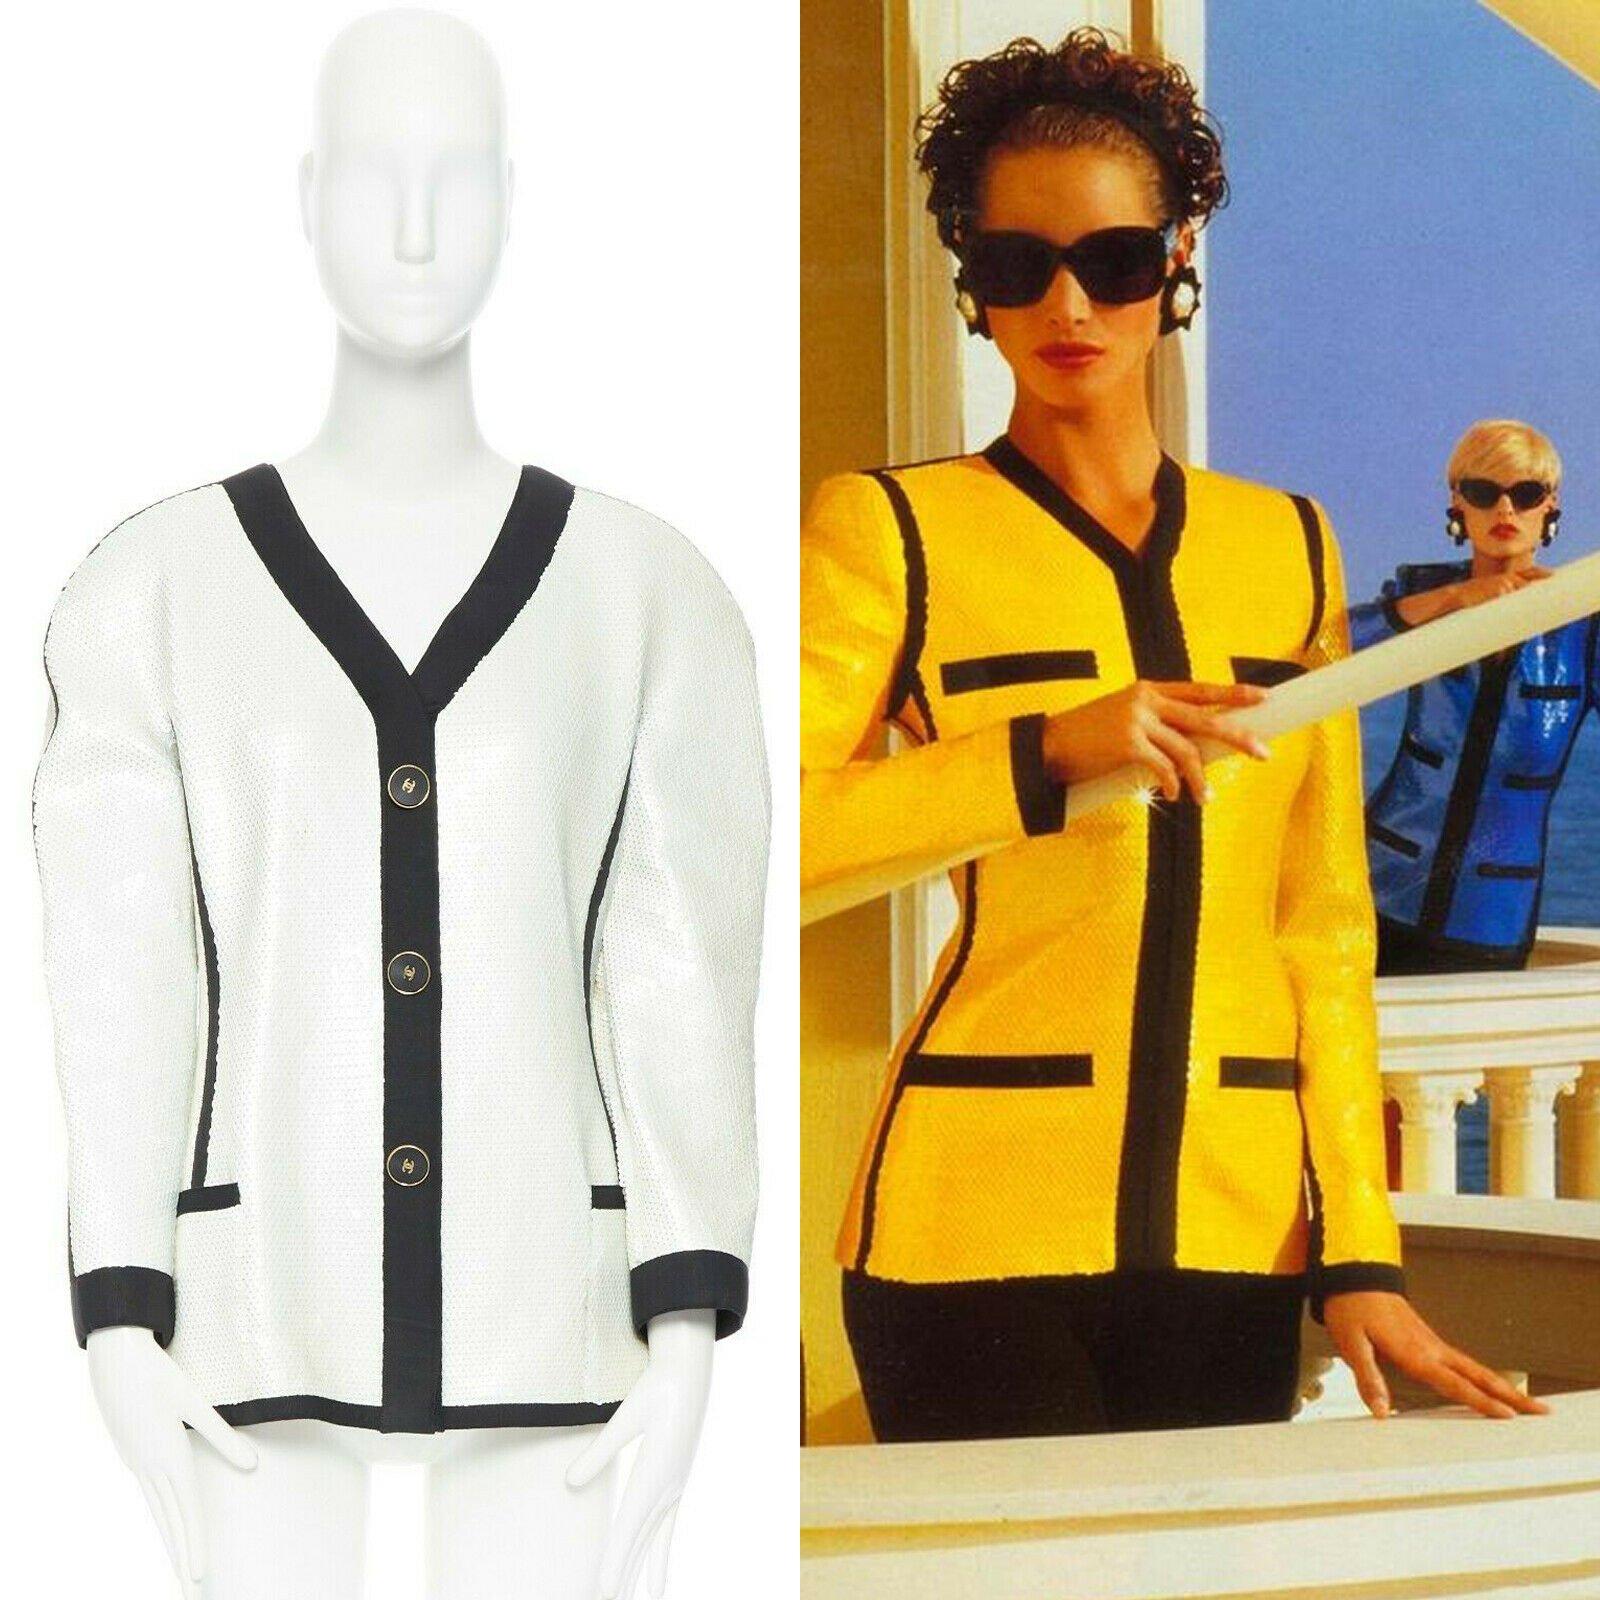 runway CHANEL SS91 white sequin black grosgrain trim scuba zipper jacket FR44
Brand: Chanel
Designer: Karl Lagerfeld
Collection: Spring Summer 1991 Runway
Material: Polyester
Color: White
Pattern: Solid
Closure: Hook & Eye
Extra Detail: From the